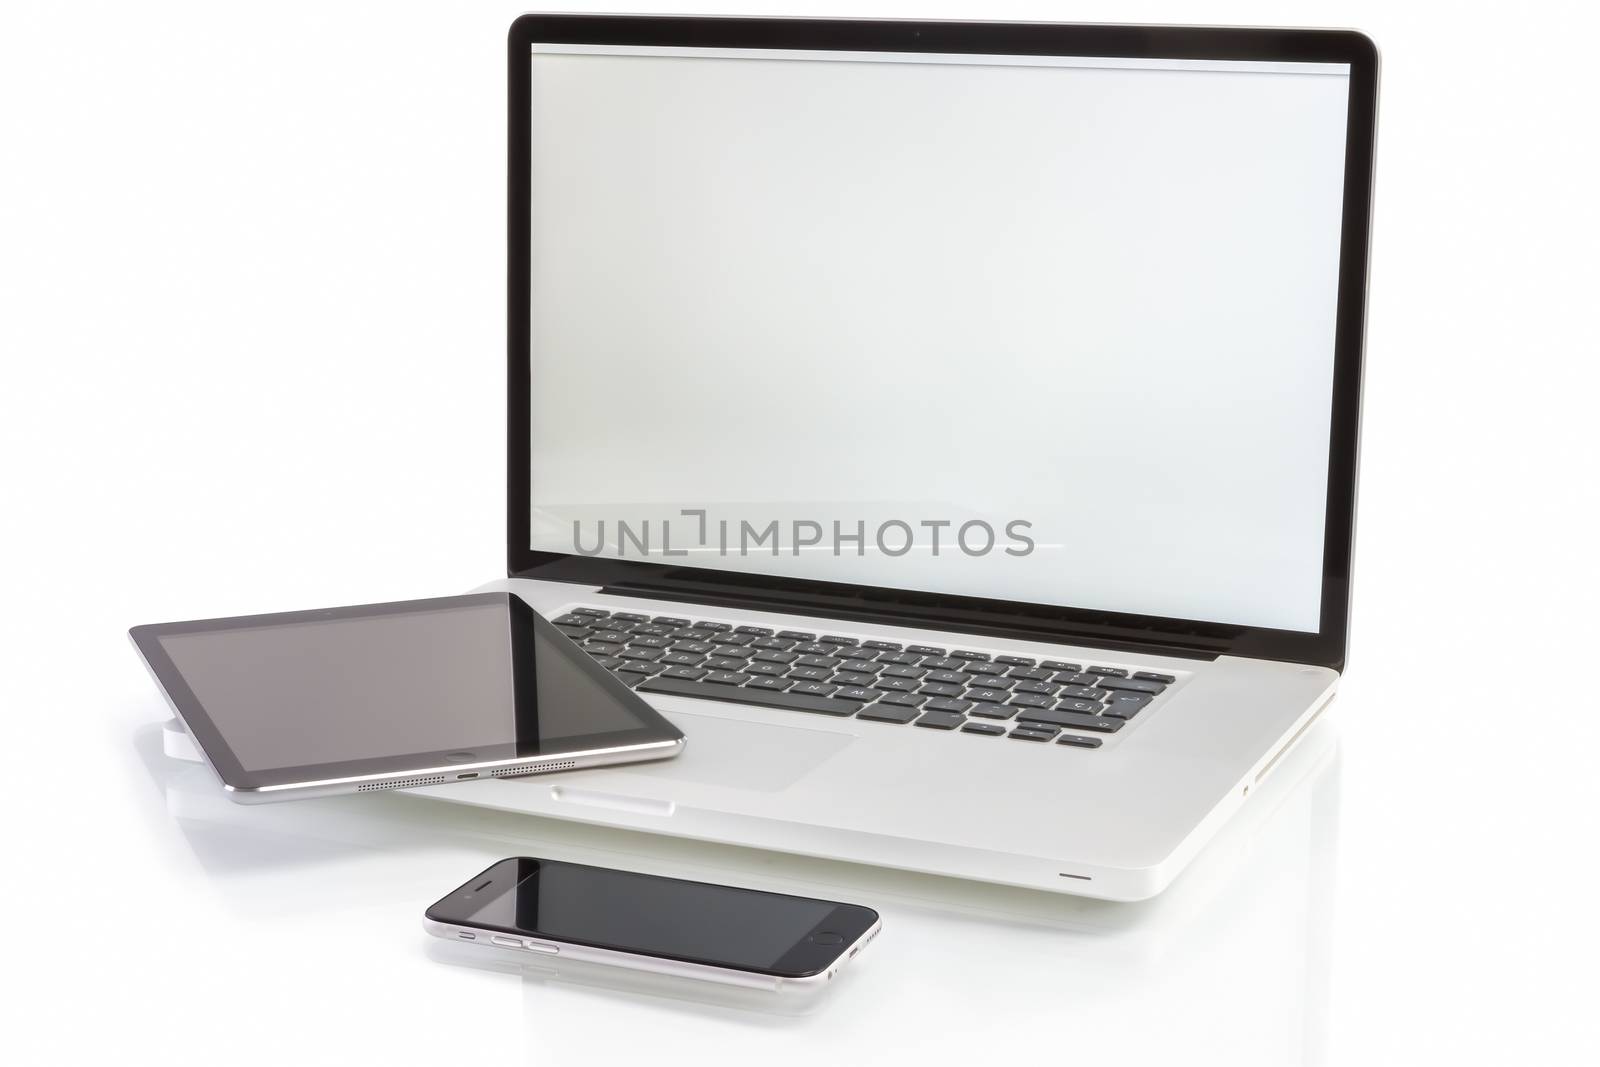 modern computer devices - laptop, tablet and phone with copy space on screen